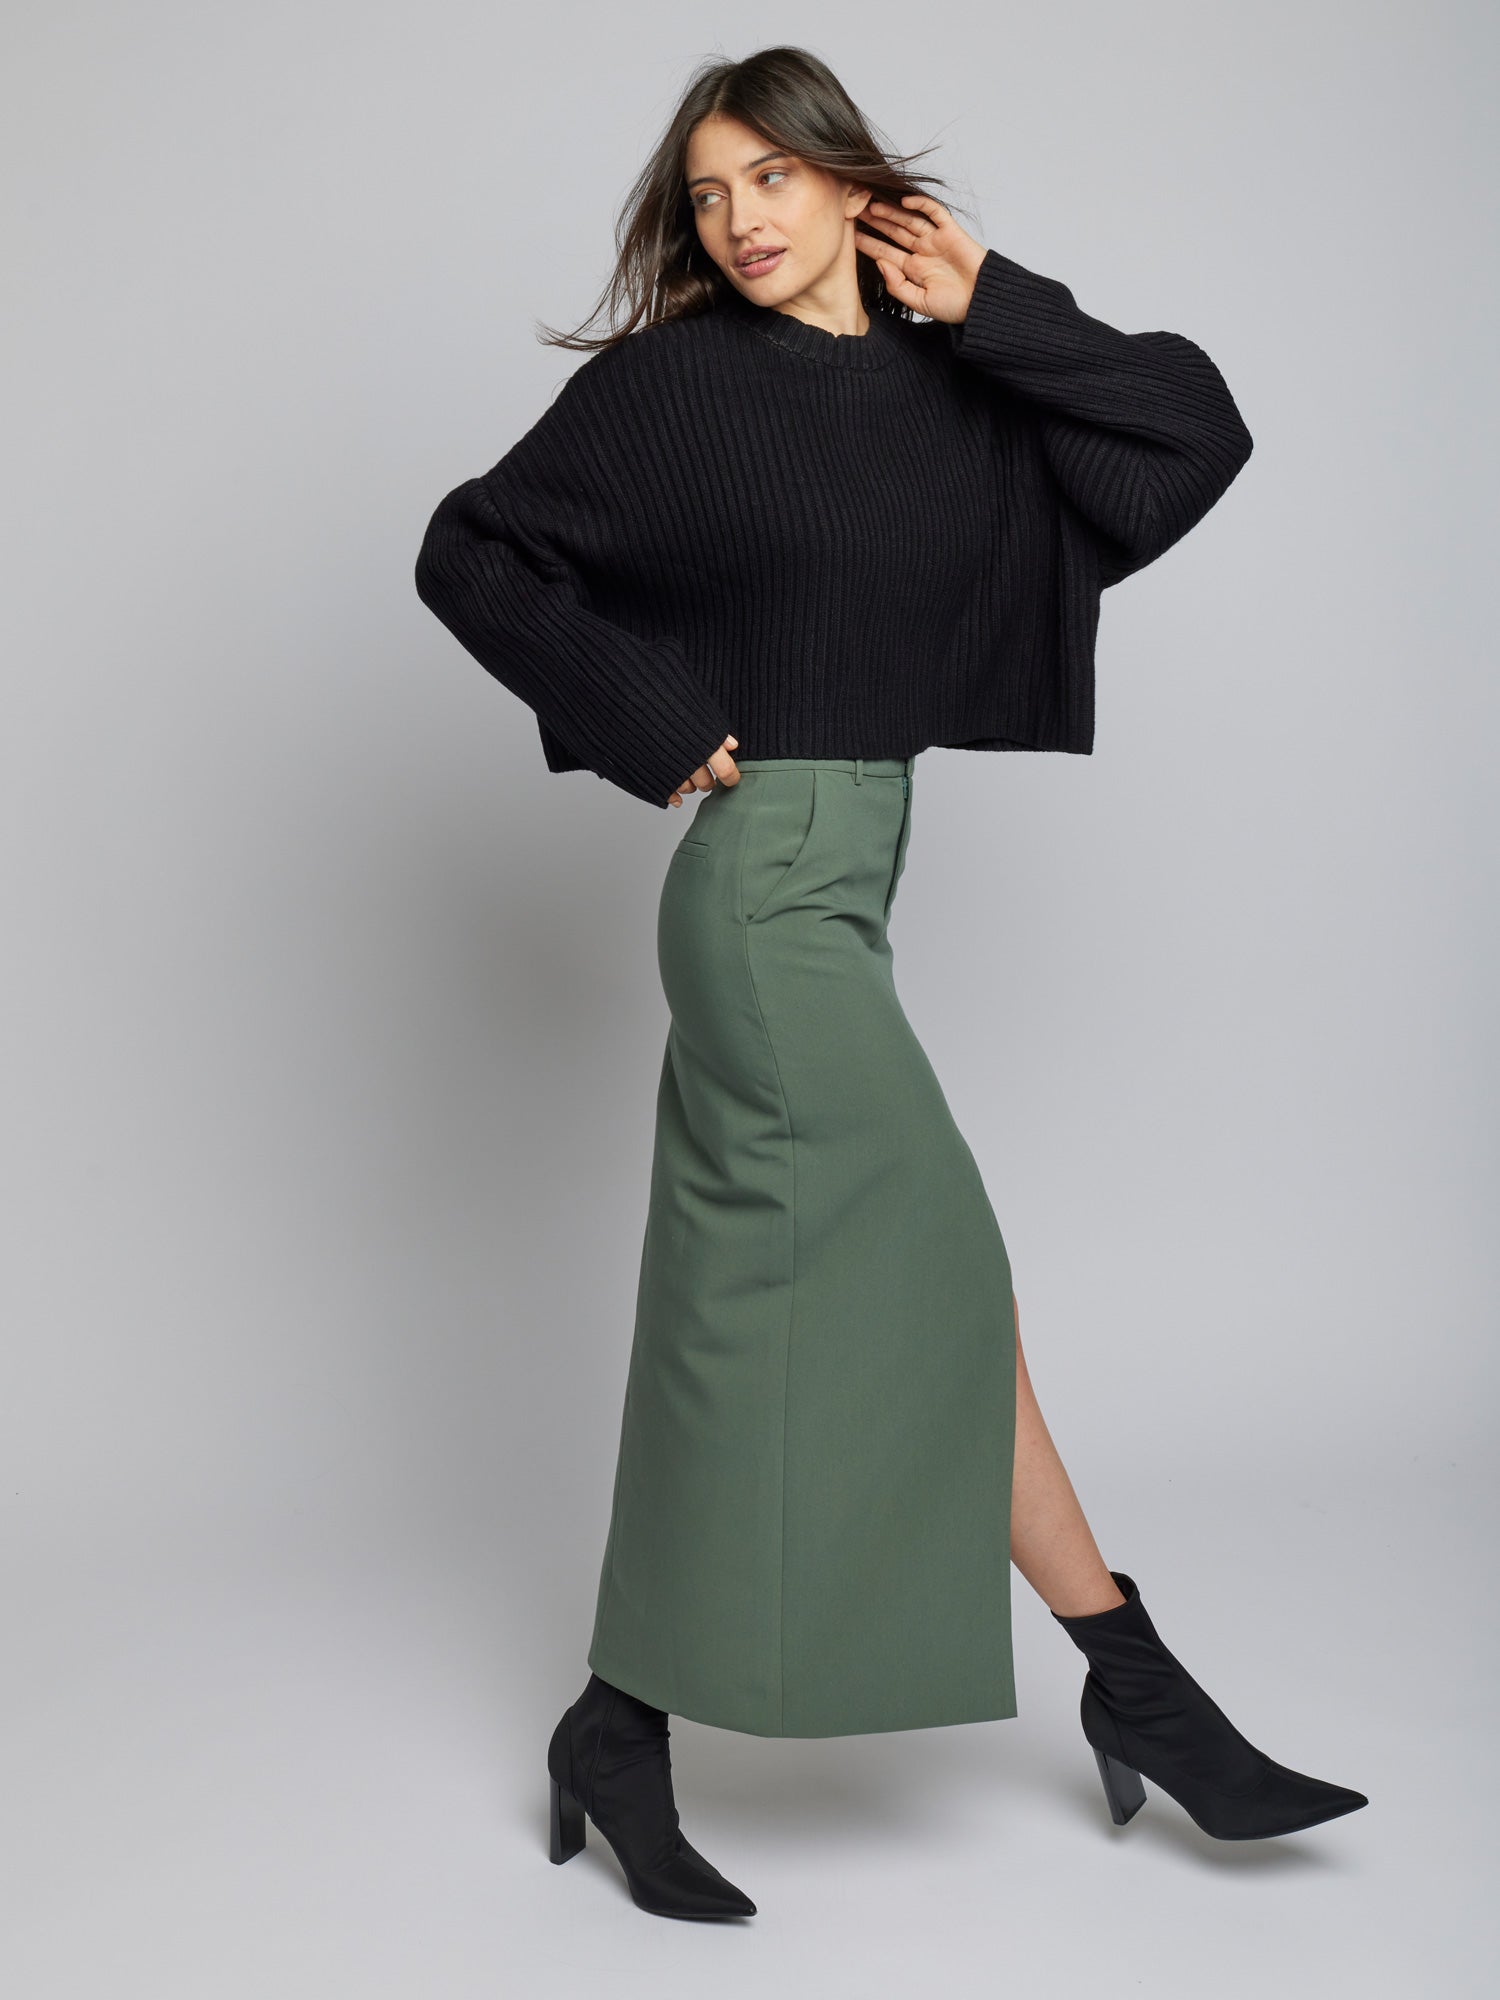 ribbed, thick crew neck sweater with a drop shoulder, relaxed fit and slightly cropped length in black